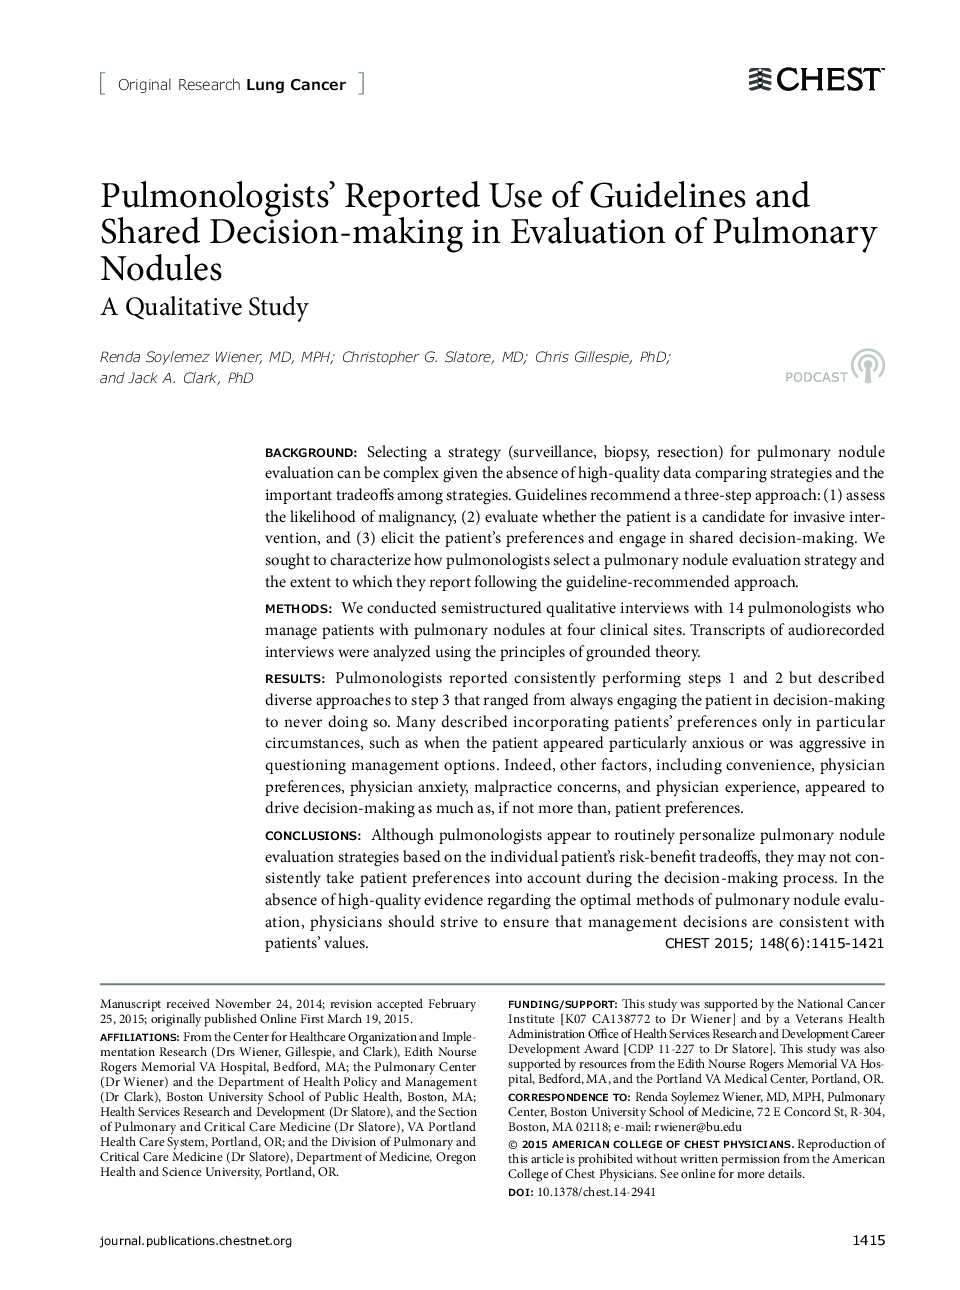 Pulmonologists' Reported Use of Guidelines and Shared Decision-making in Evaluation of Pulmonary Nodules